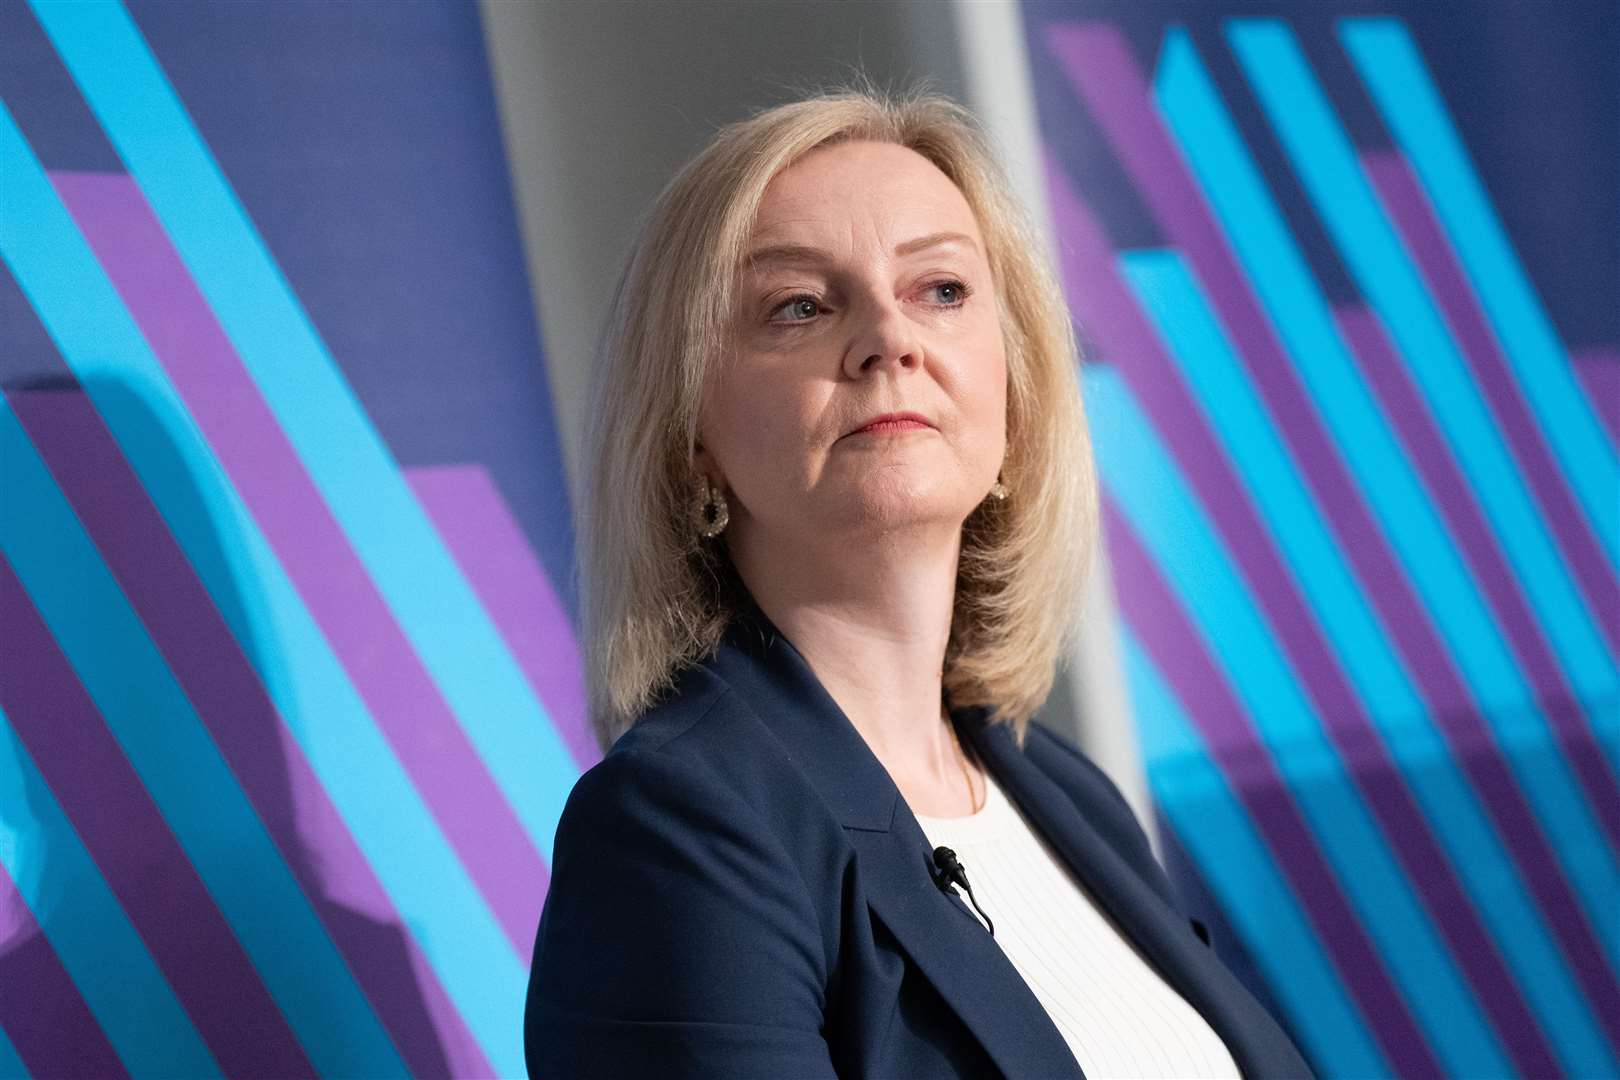 Former prime minister Liz Truss has called for lower taxes (Stefan Rousseau/PA)